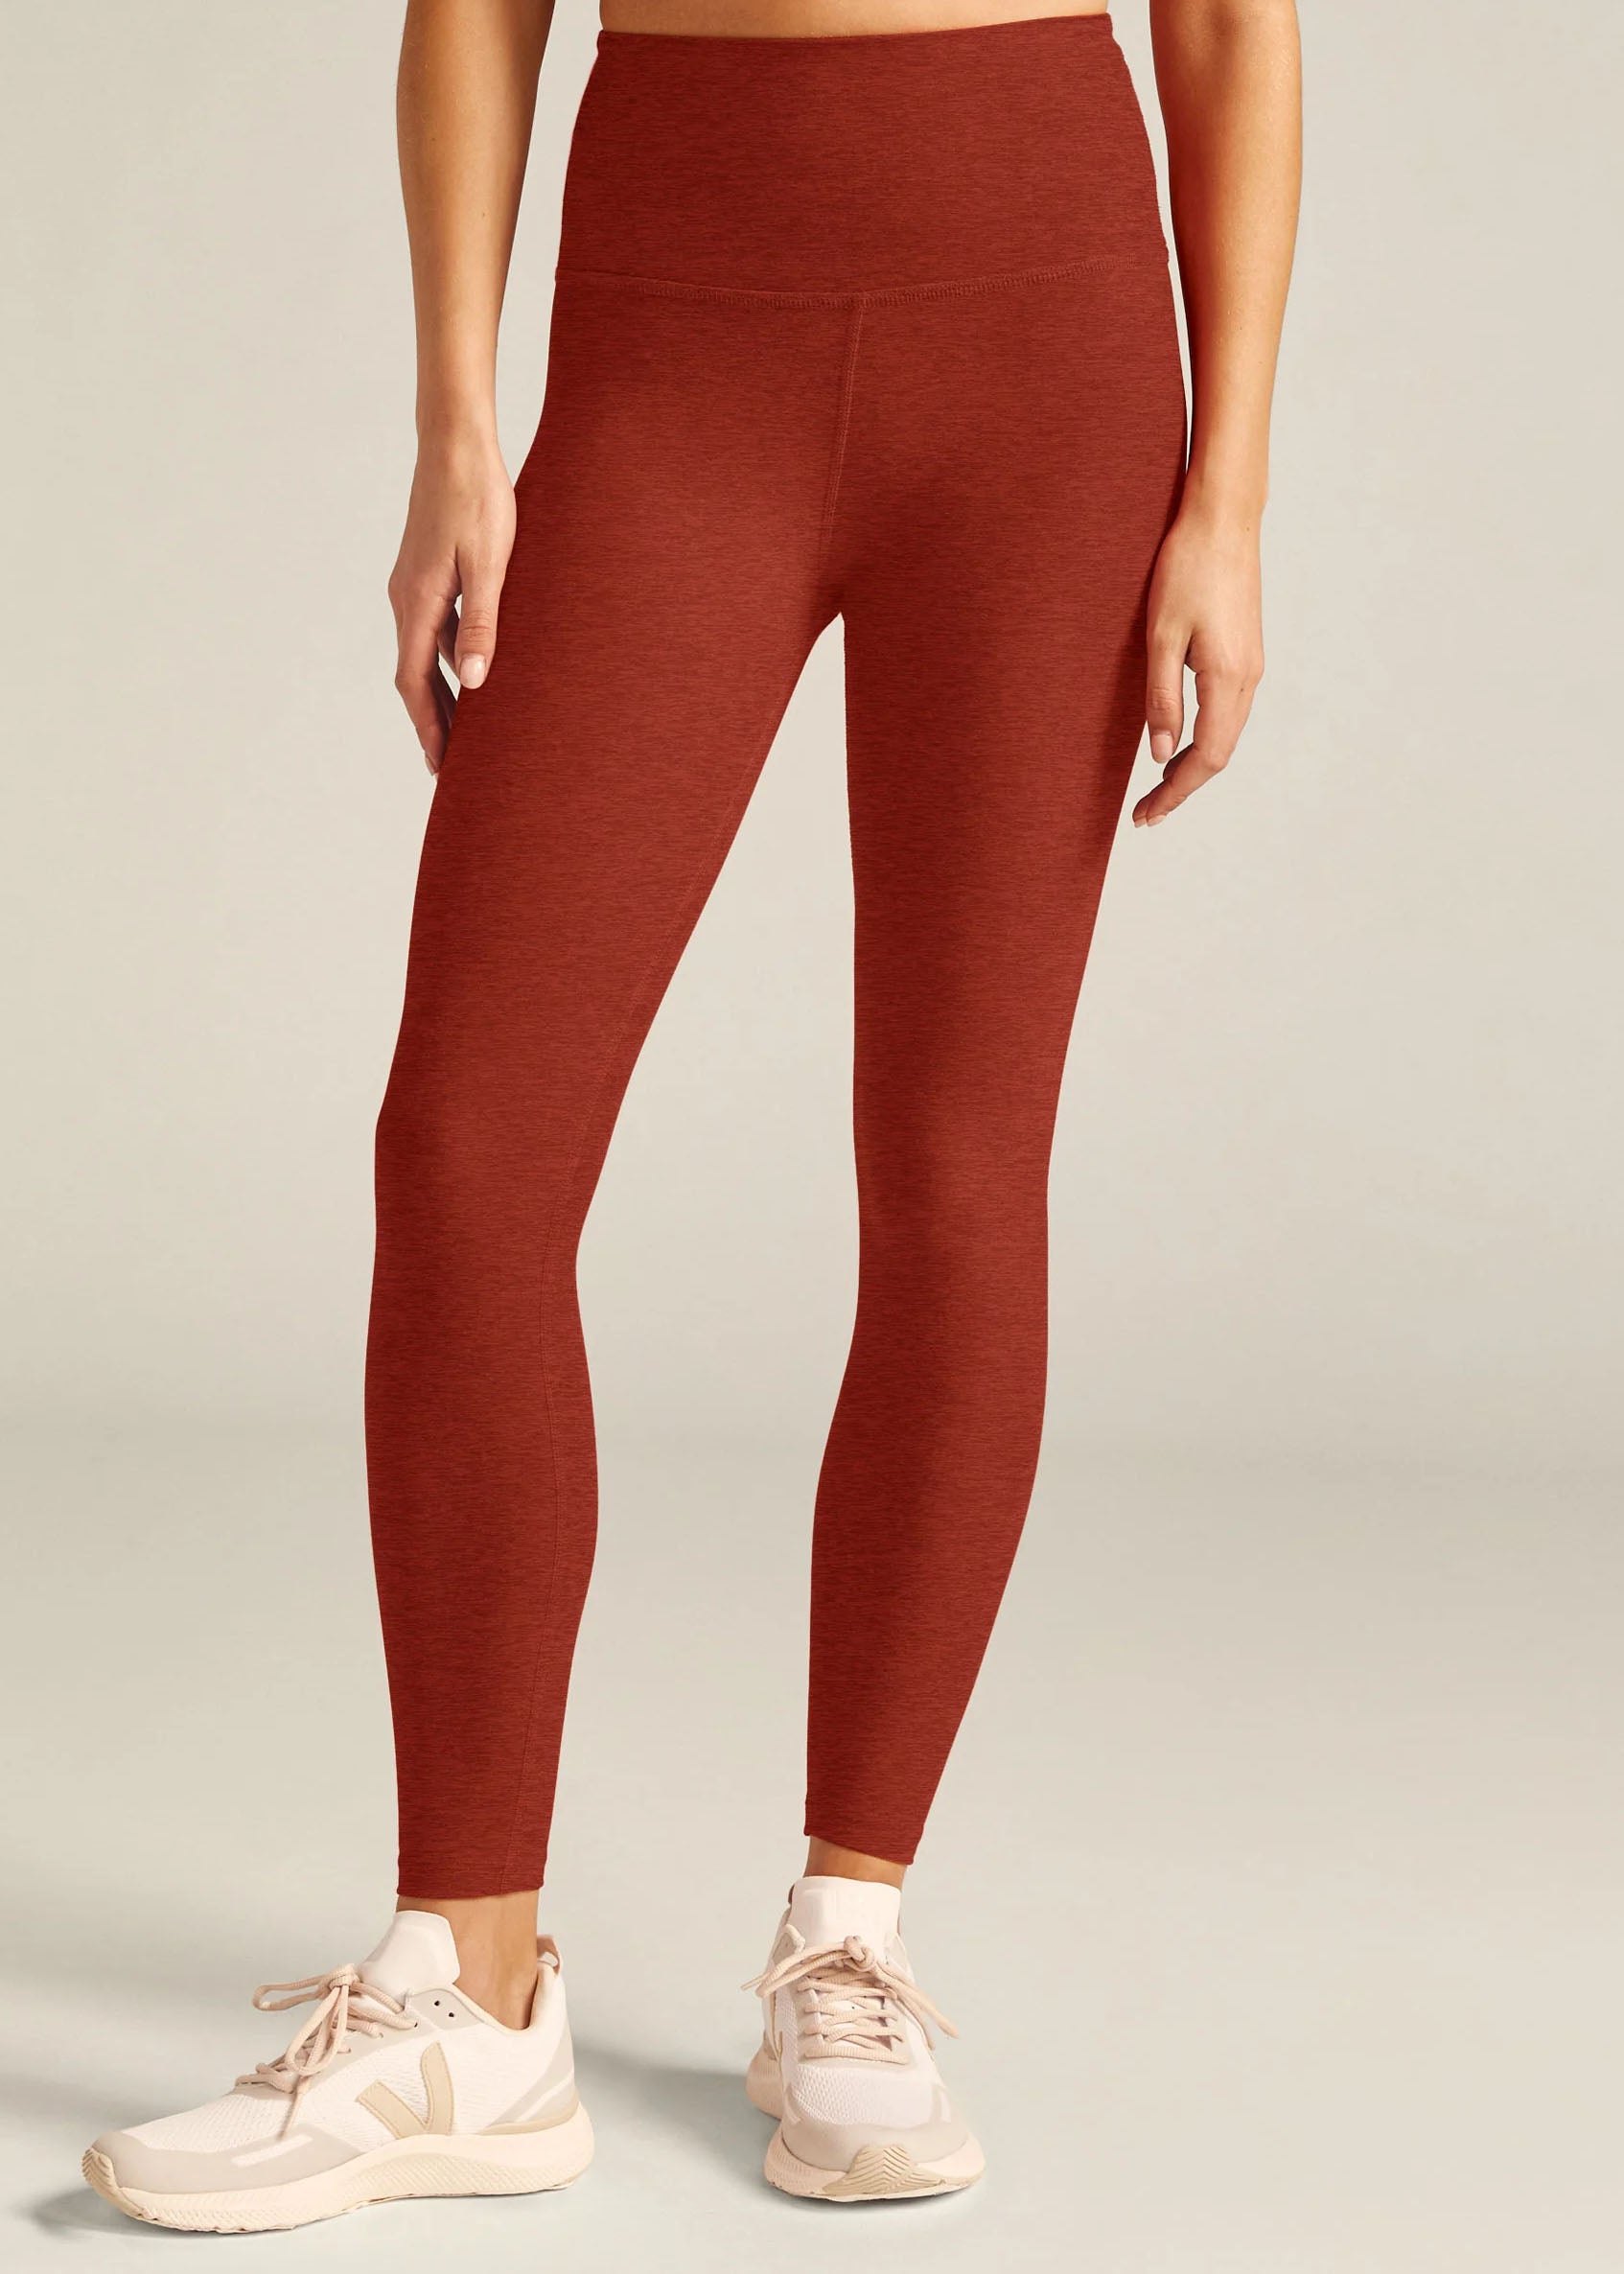 Spacedye Caught in the Midi High Waisted Legging- Red Sand Heather – Active  Threads